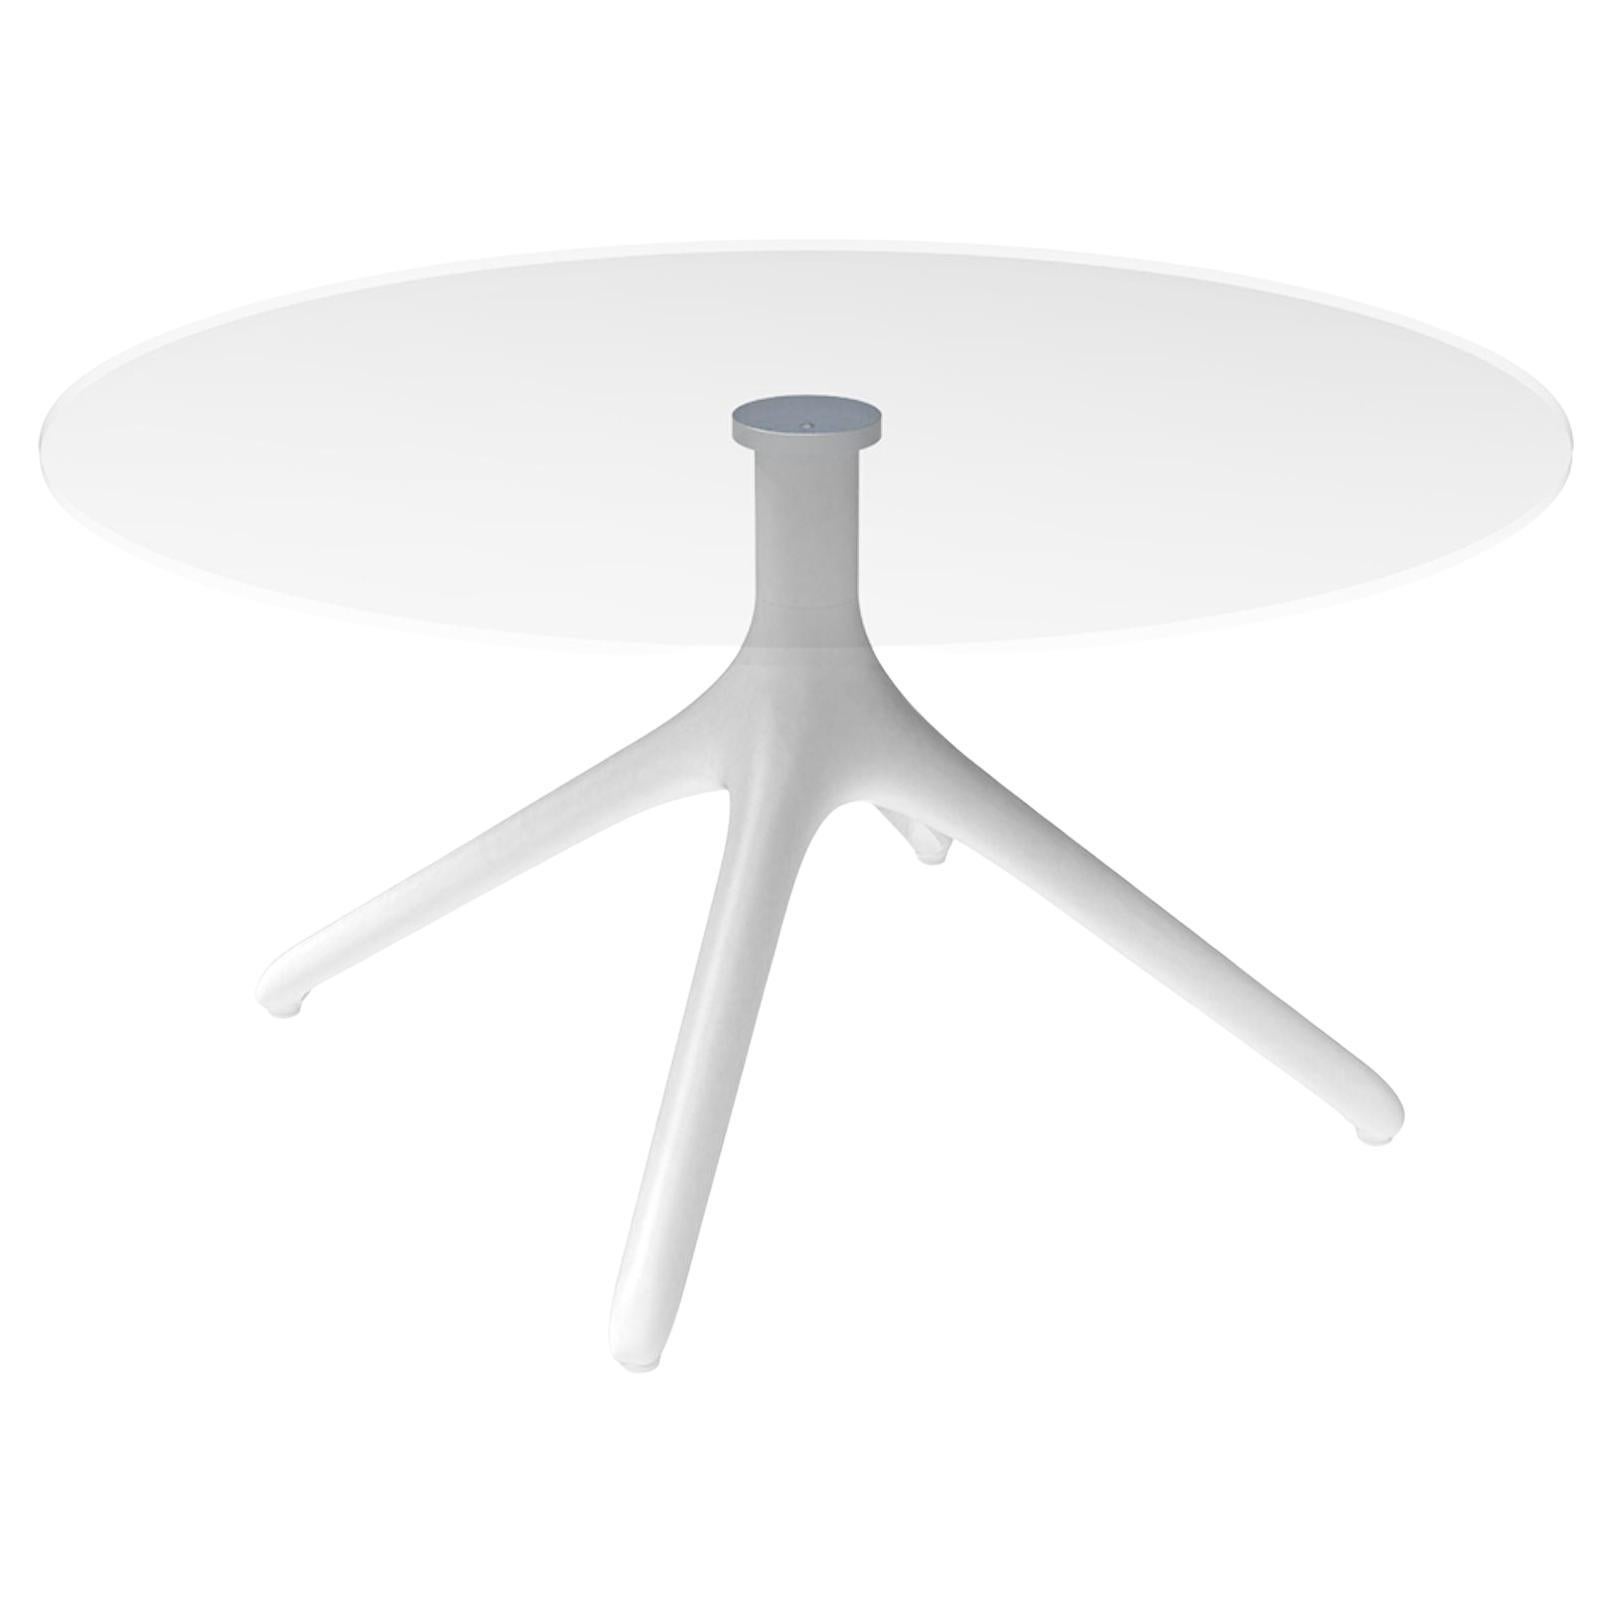 Uni White Table Xl 50 by Mowee For Sale